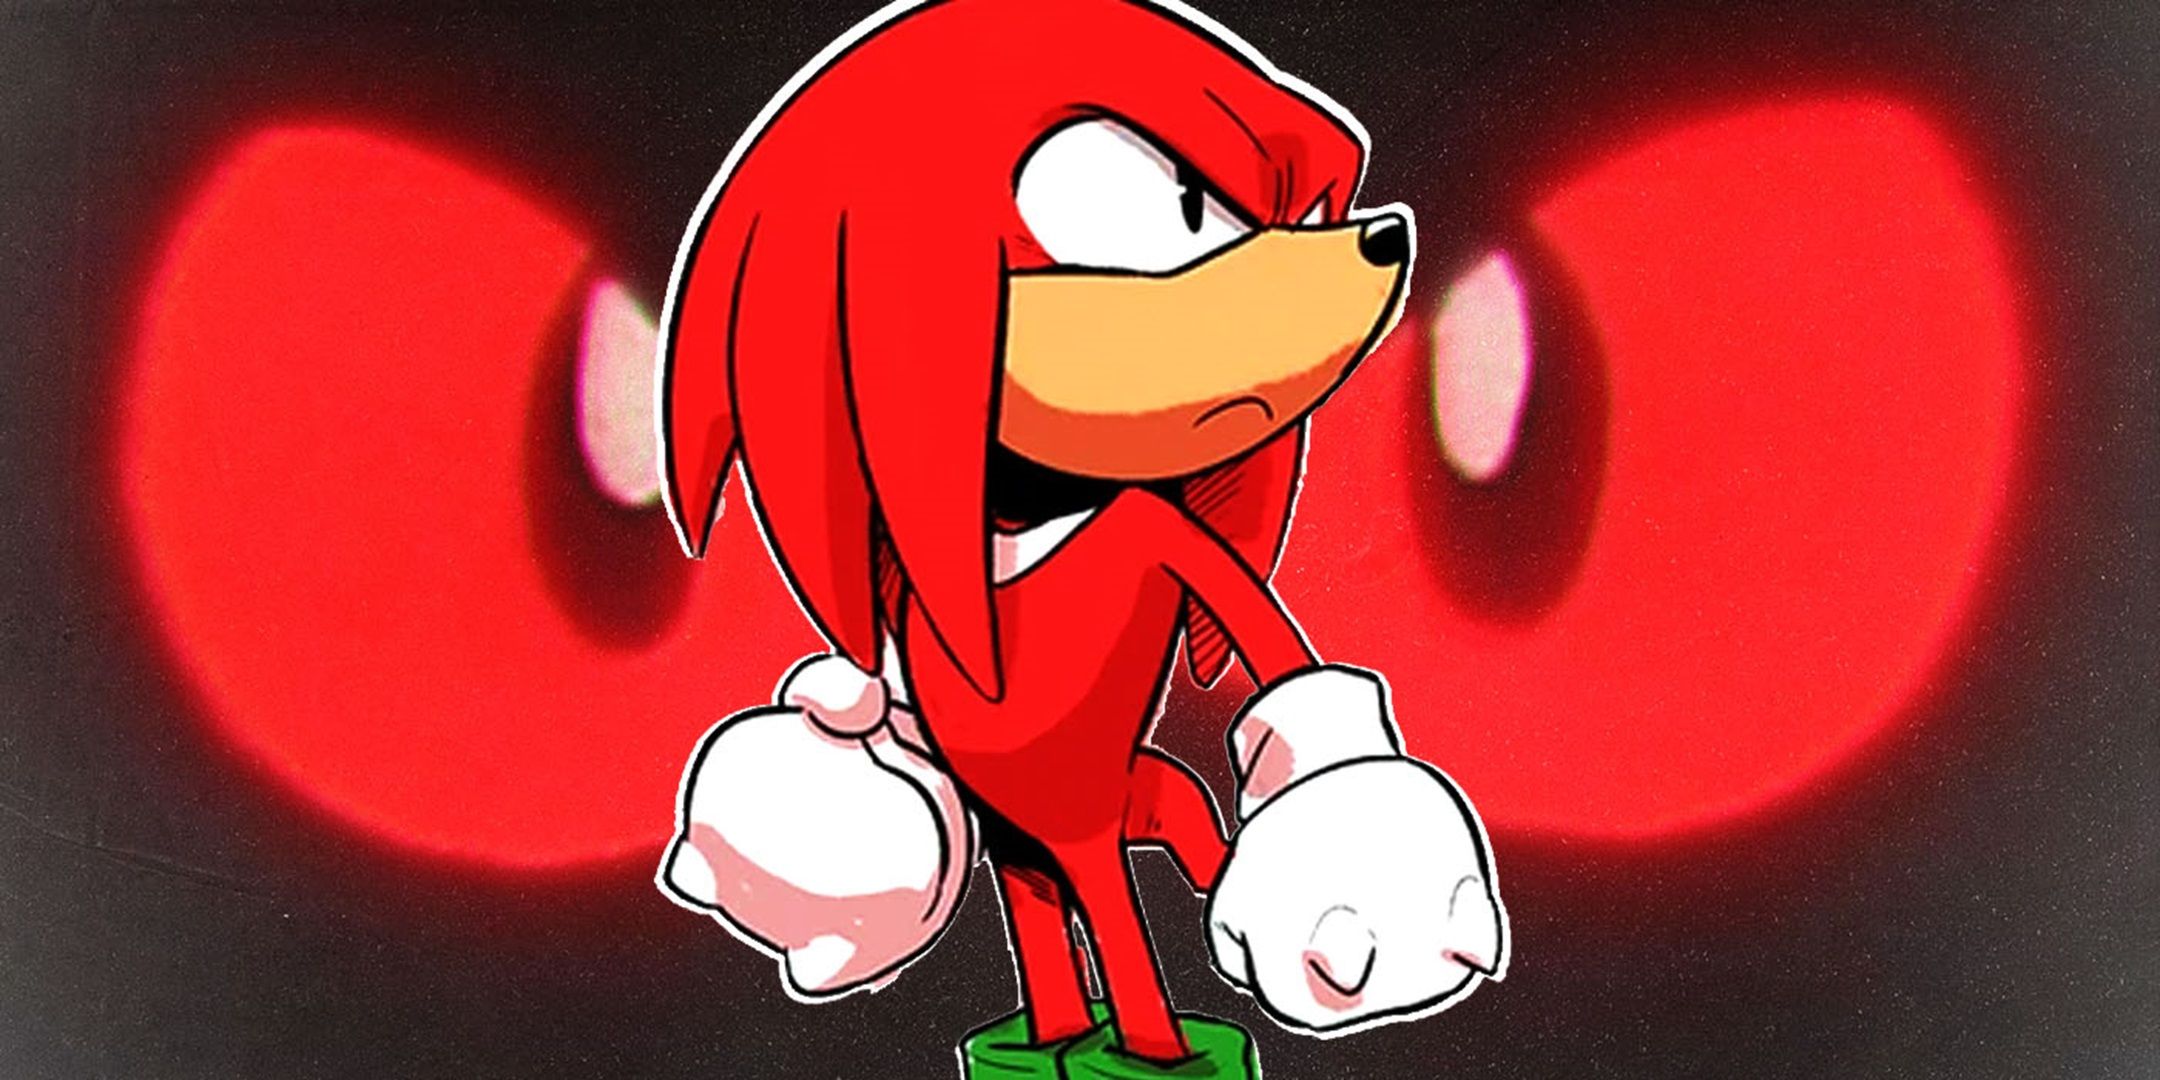 Knuckles in front of red eyes